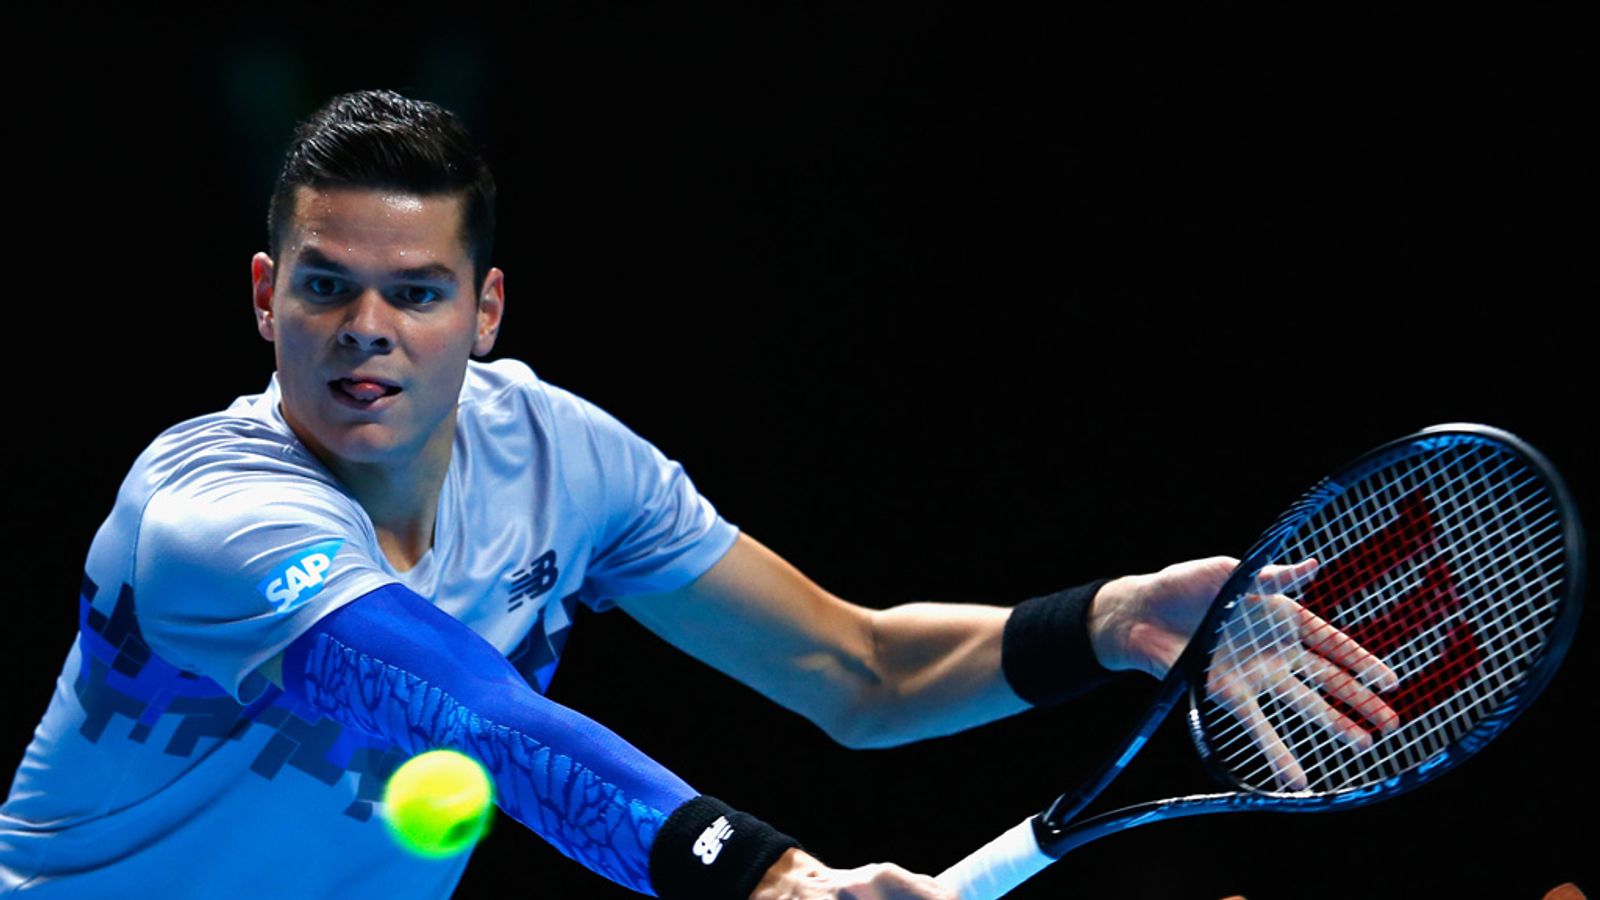 ATP World Tour Finals Injury forces Milos Raonic out and replaced by David Ferrer Tennis News Sky Sports